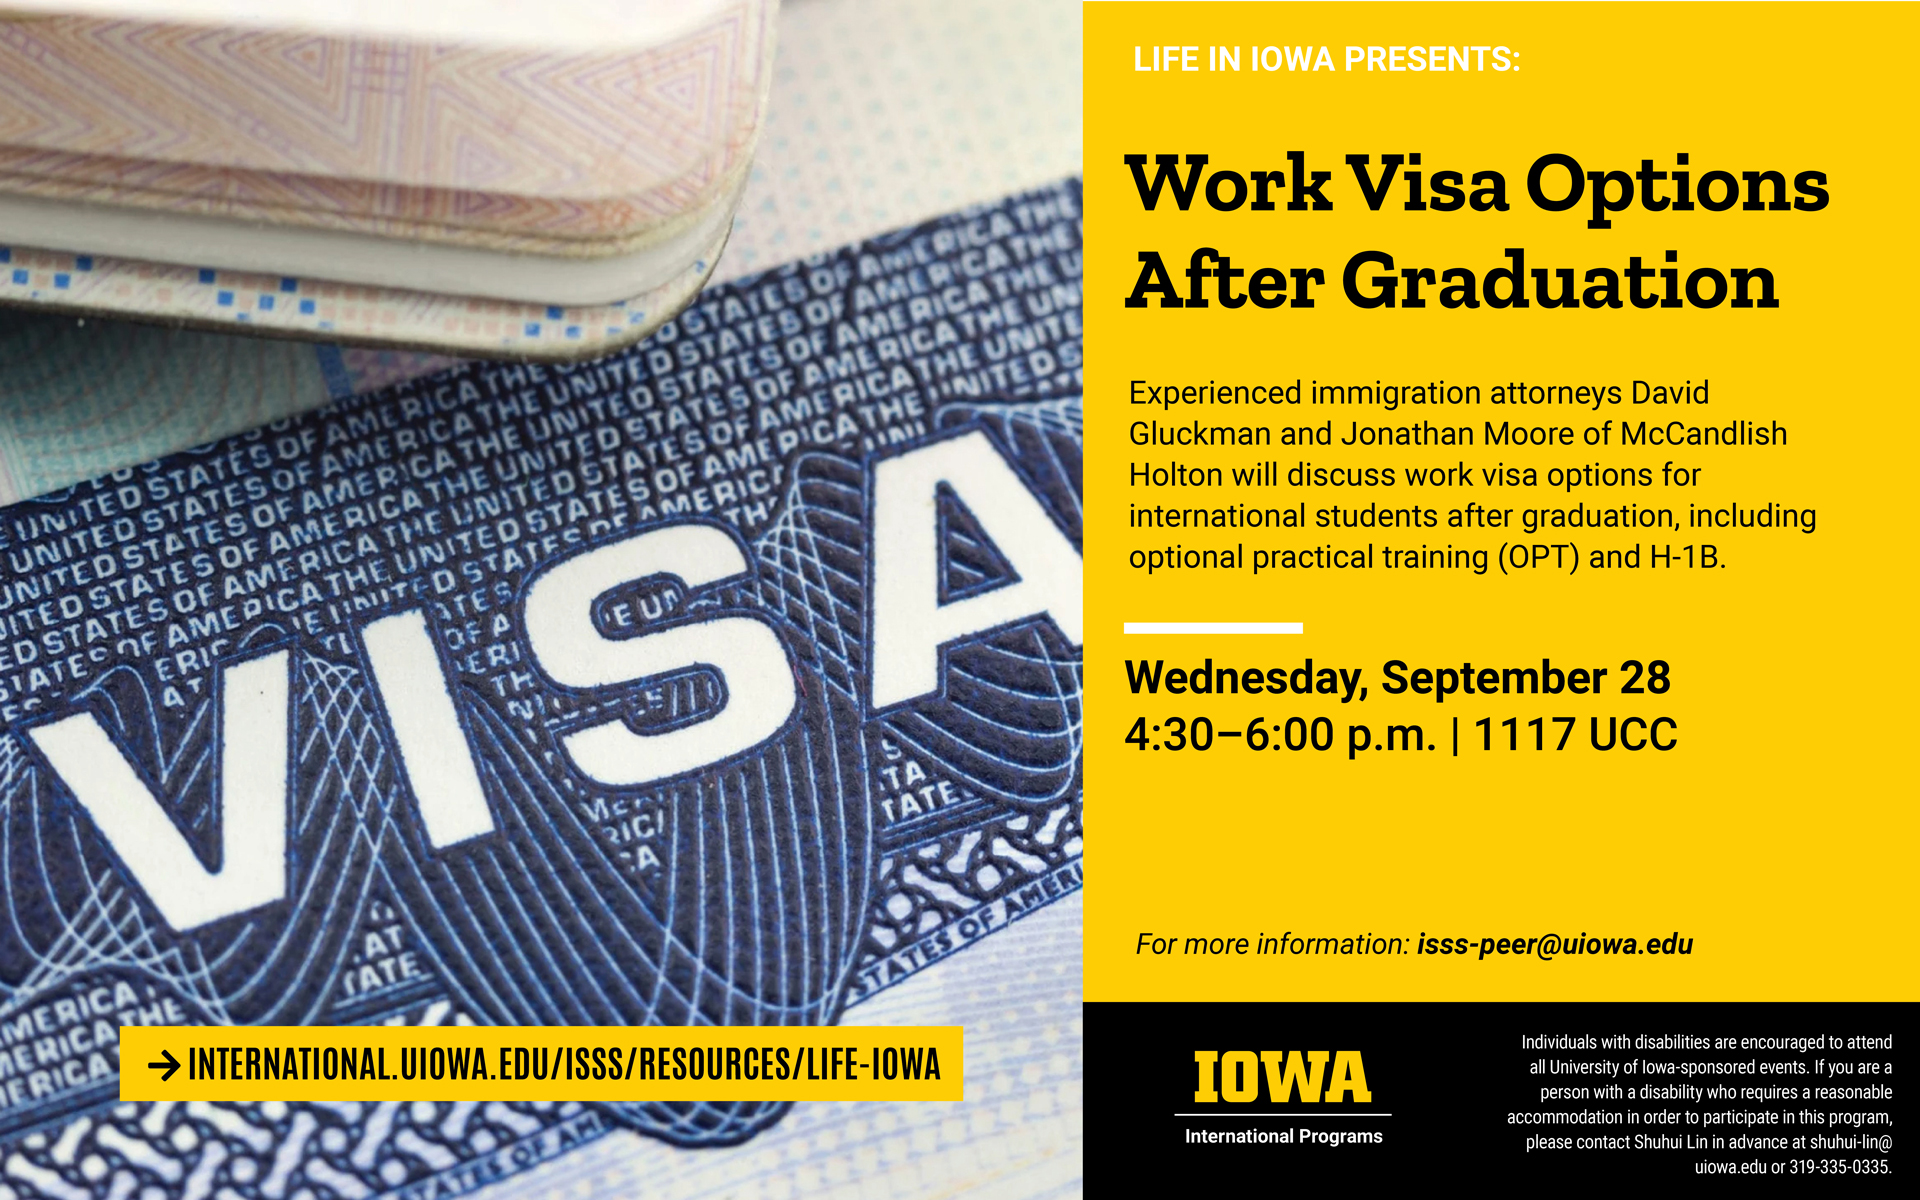 Picture of a US Visa certificate. Life in Iowa presents: Work Visa Options after Graduation. Experienced immigration attorneys David Gluckman and Jonathan Moore of McCandlish Holton will discuss work visa options for international students after graduation, including optional practical training (OPT) and H-1B. Wednesday, September 28, 4:30- 6:00 pm, in room 1117 UCC. For more information, email isss-peer@uiowa.edu. Individuals with disabilities are encouraged to attend all University of Iowa-sponsored events. If you are a person with a disability who requires a reasonable accommodation in order to participate in this program, please contact Shuhui Lin in advance at chuhui-lin@uiowa.edu or 319-335-0335. 